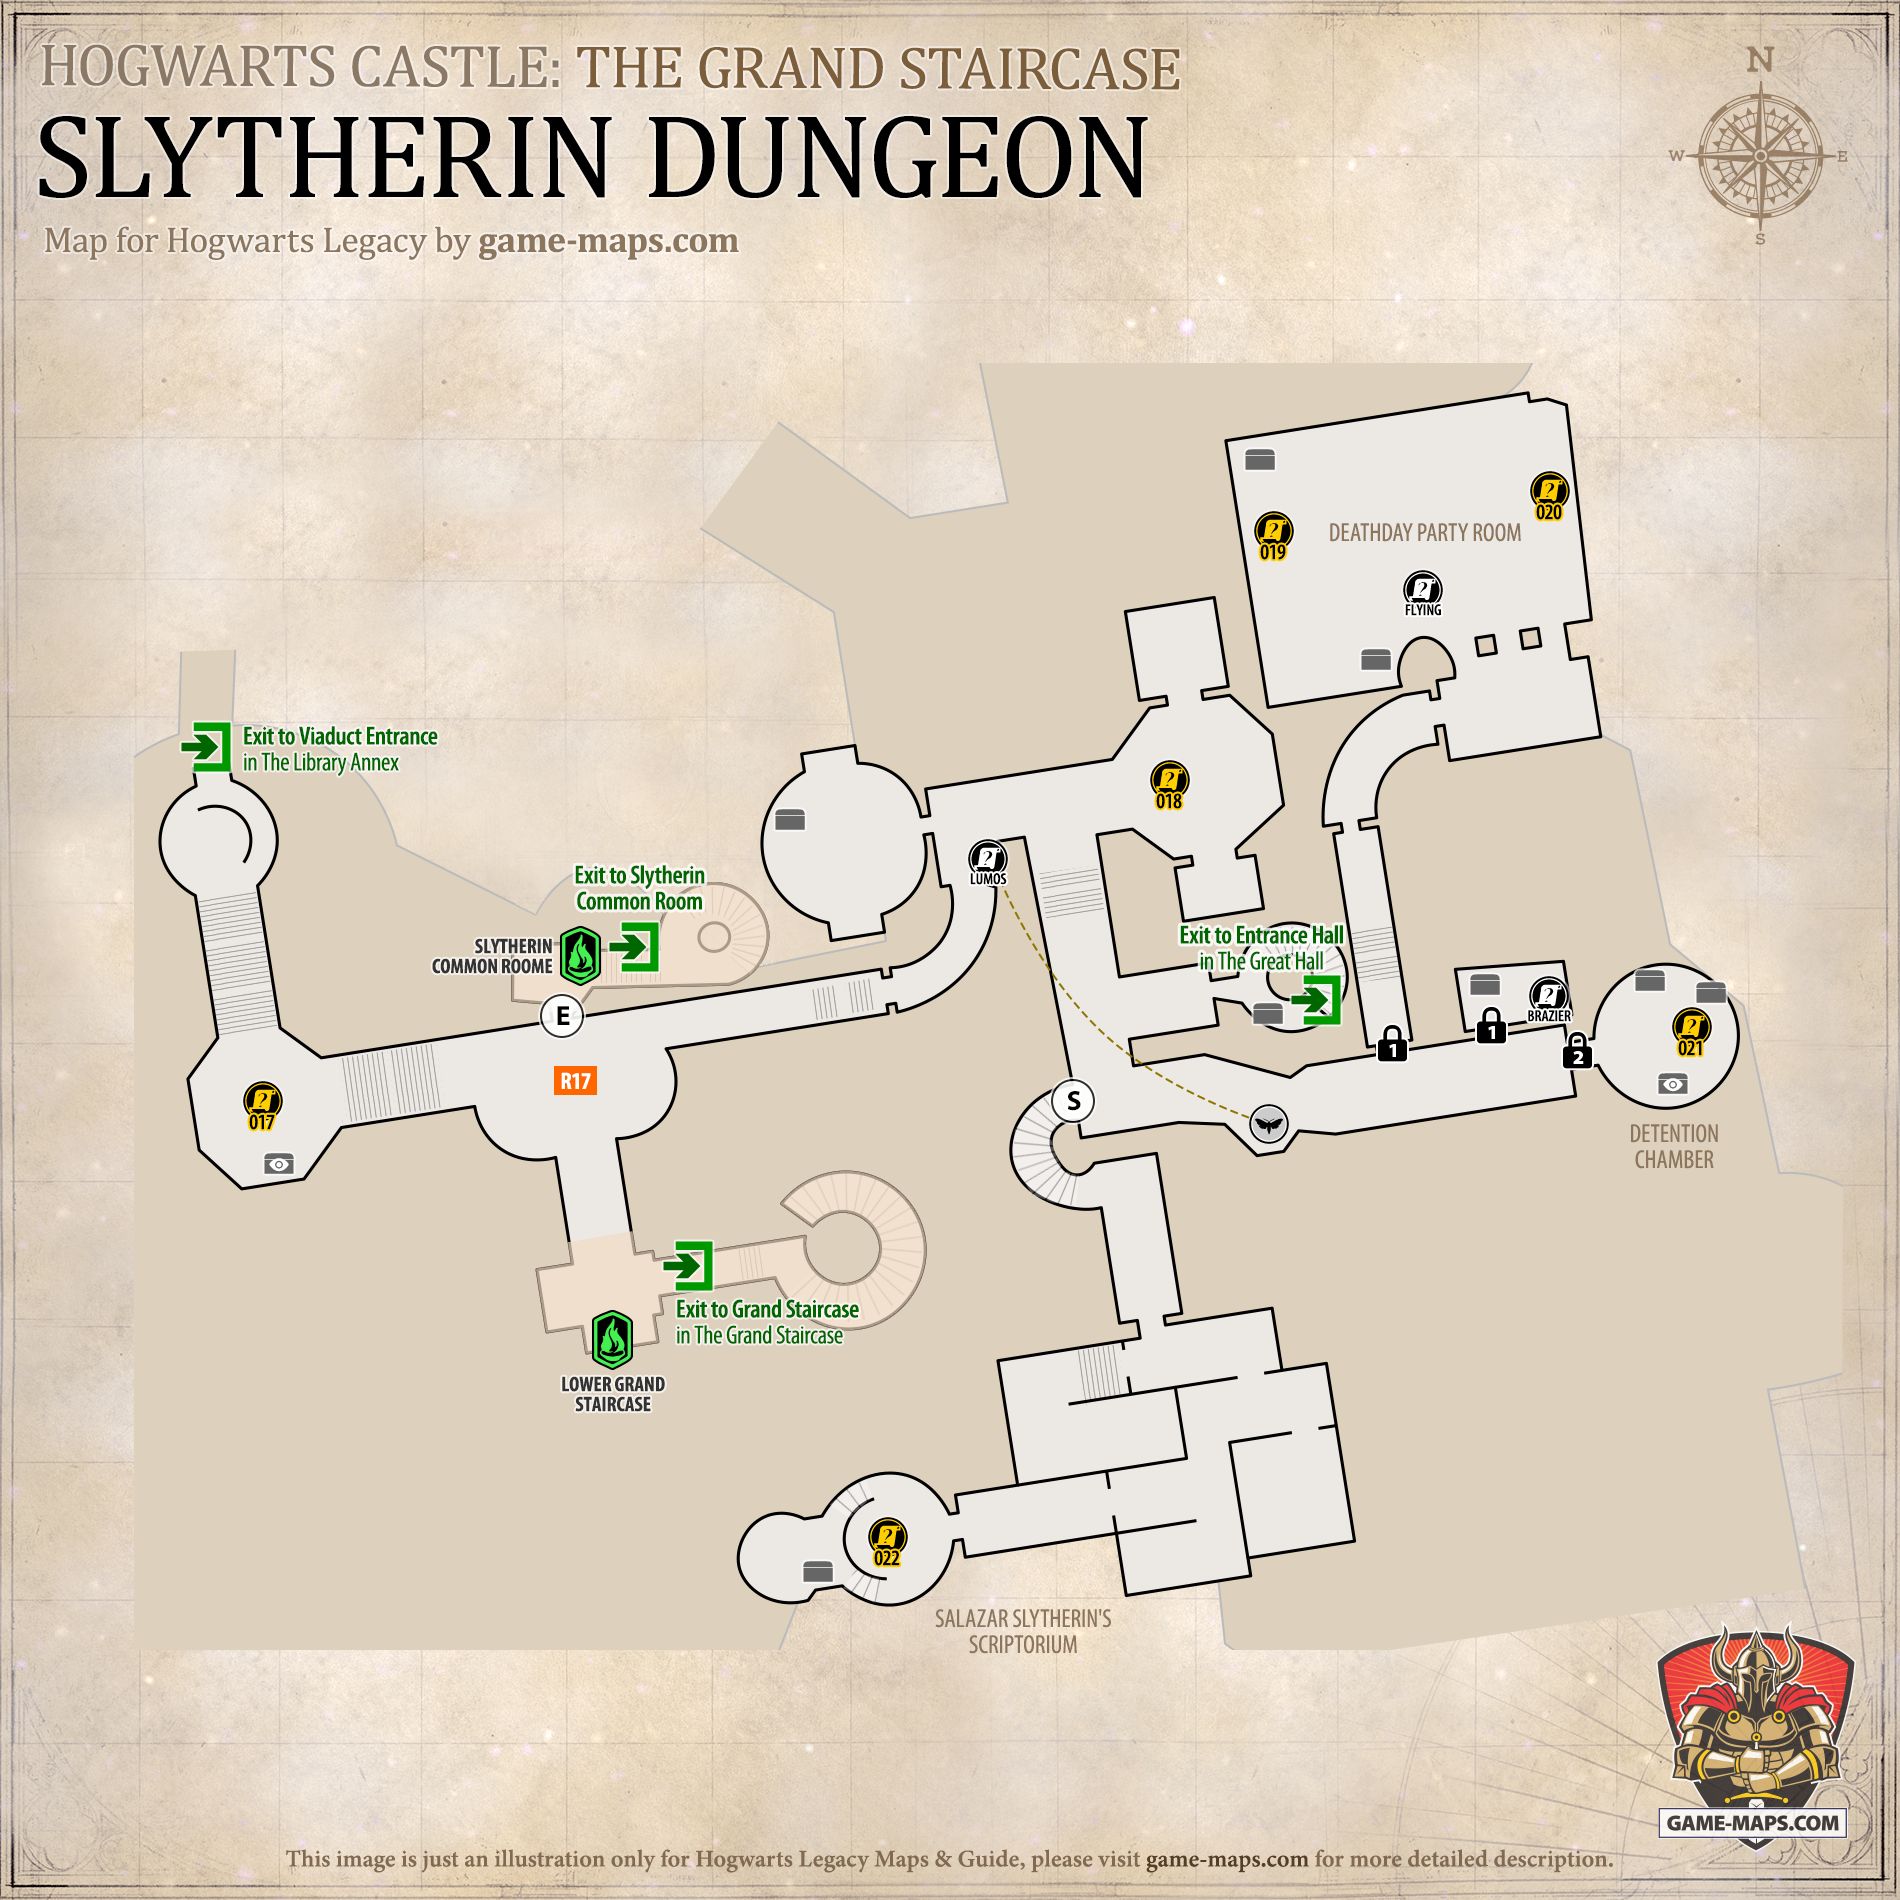 Slytherin Dungeon Map for Hogwarts Legacy